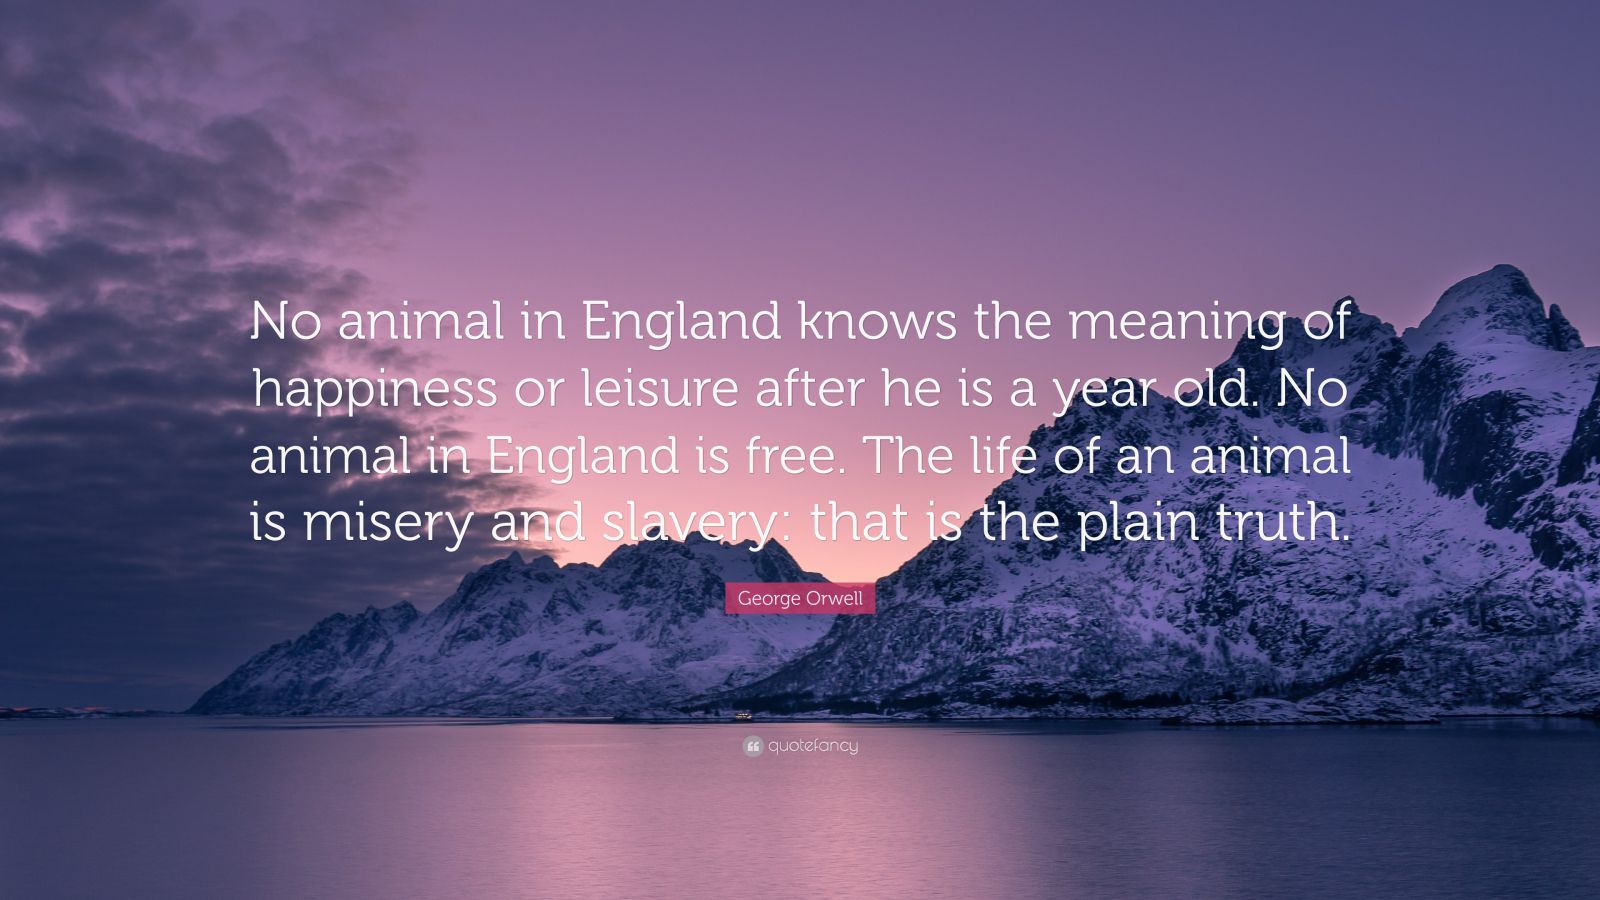 George Orwell Quote: “No animal in England knows the meaning of